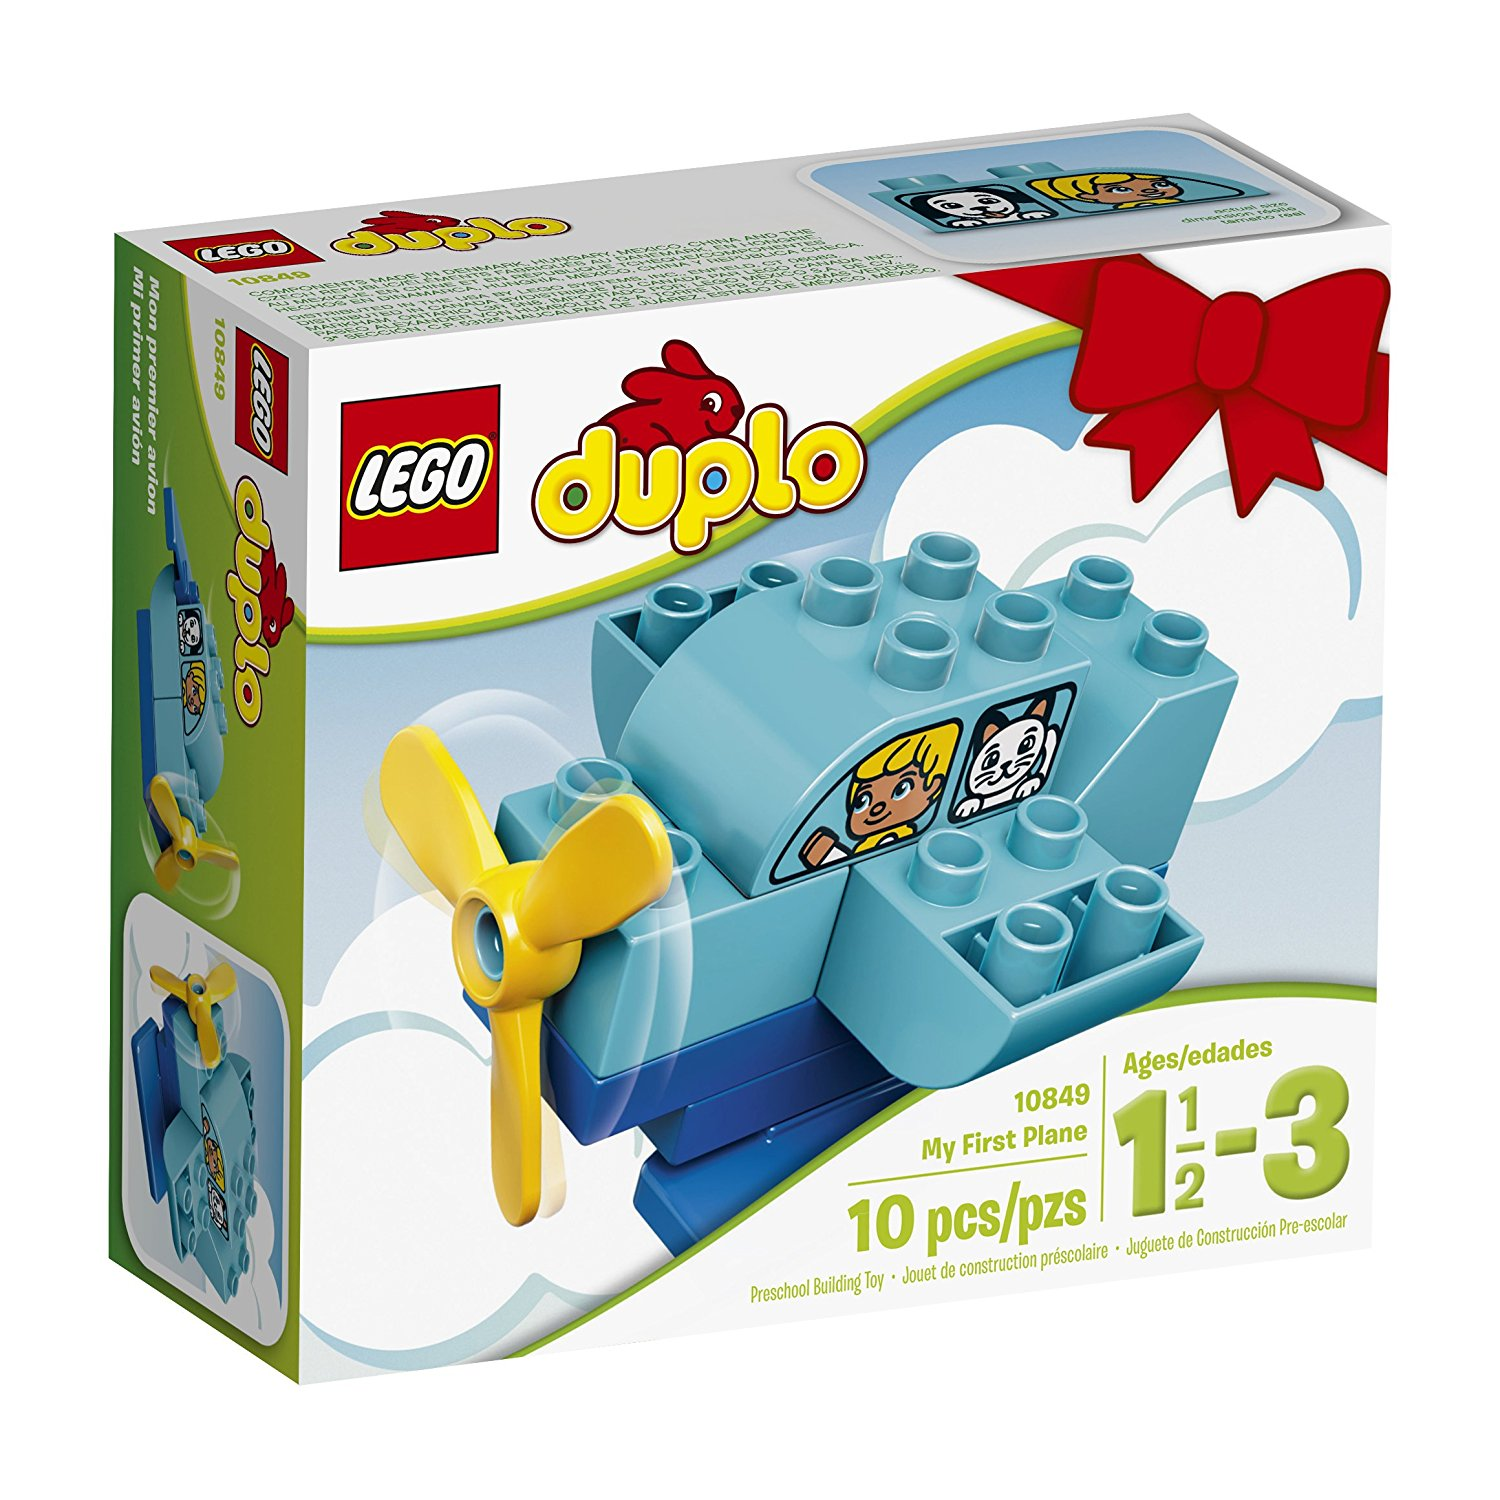 LEGO DUPLO My First Plane Building Kit Only $2.50!